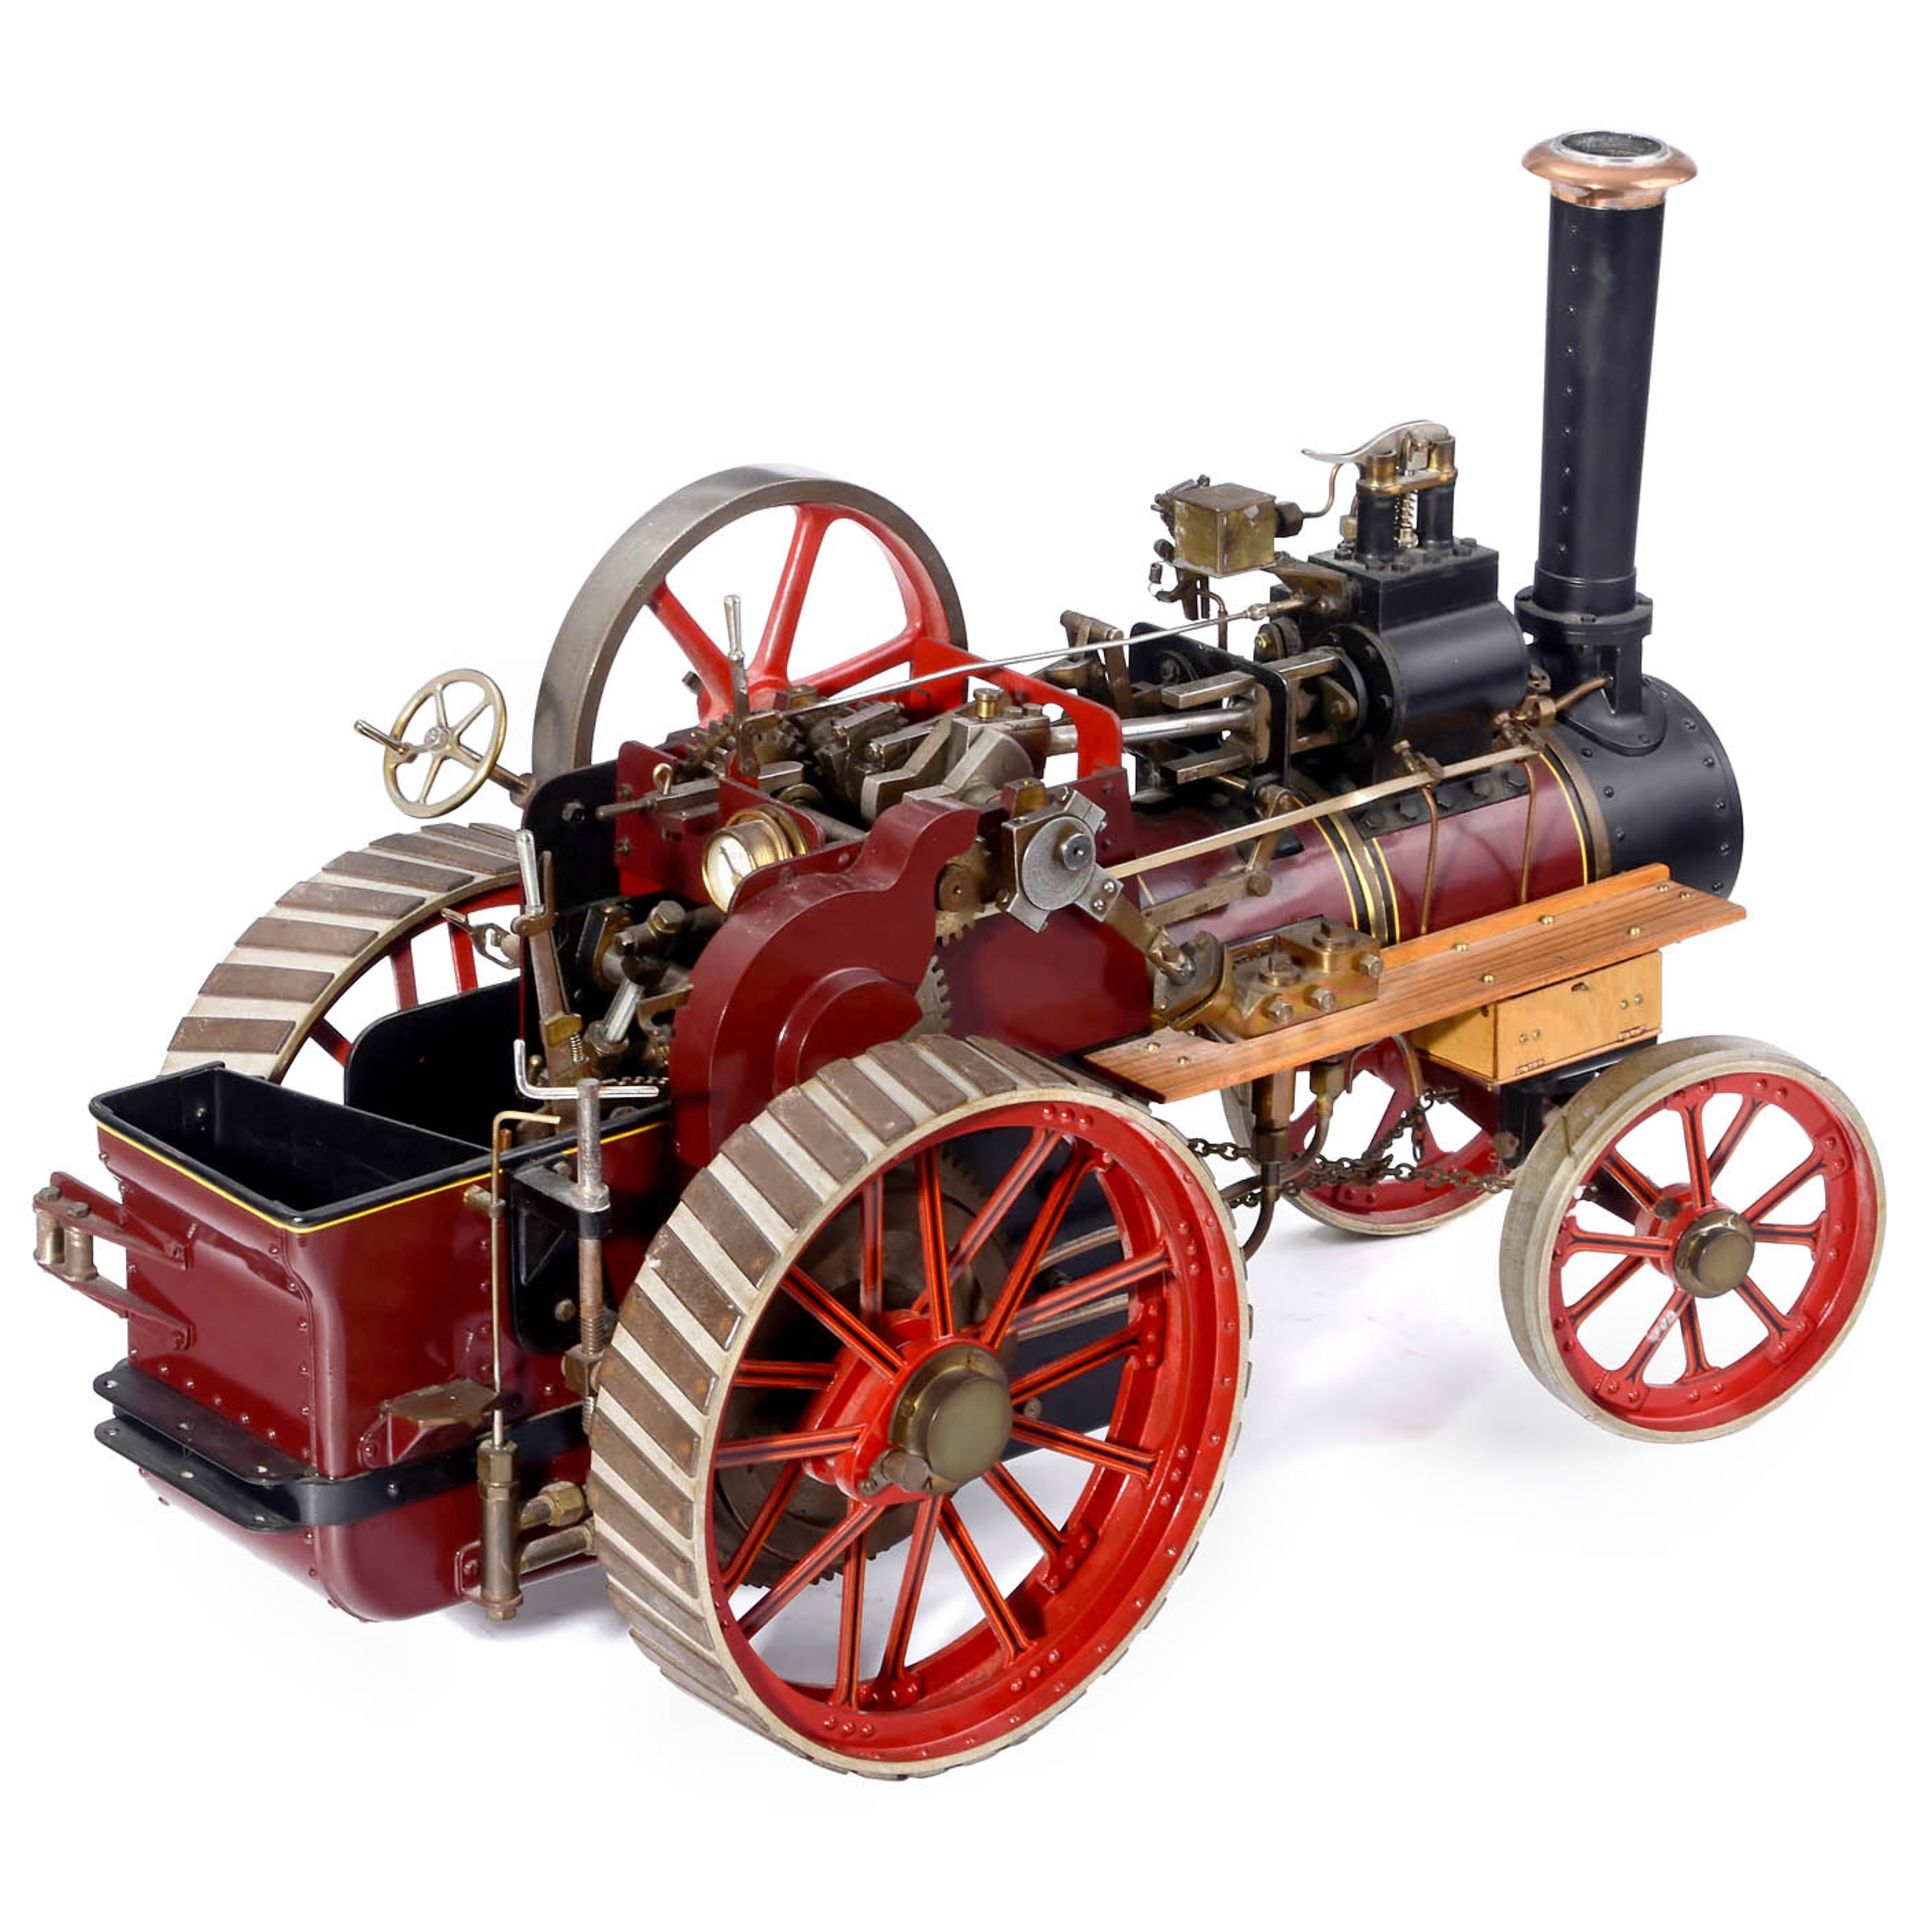 1-Inch Scale Model of a Live-Steam Traction Engine, c. 1980 - Bild 3 aus 5